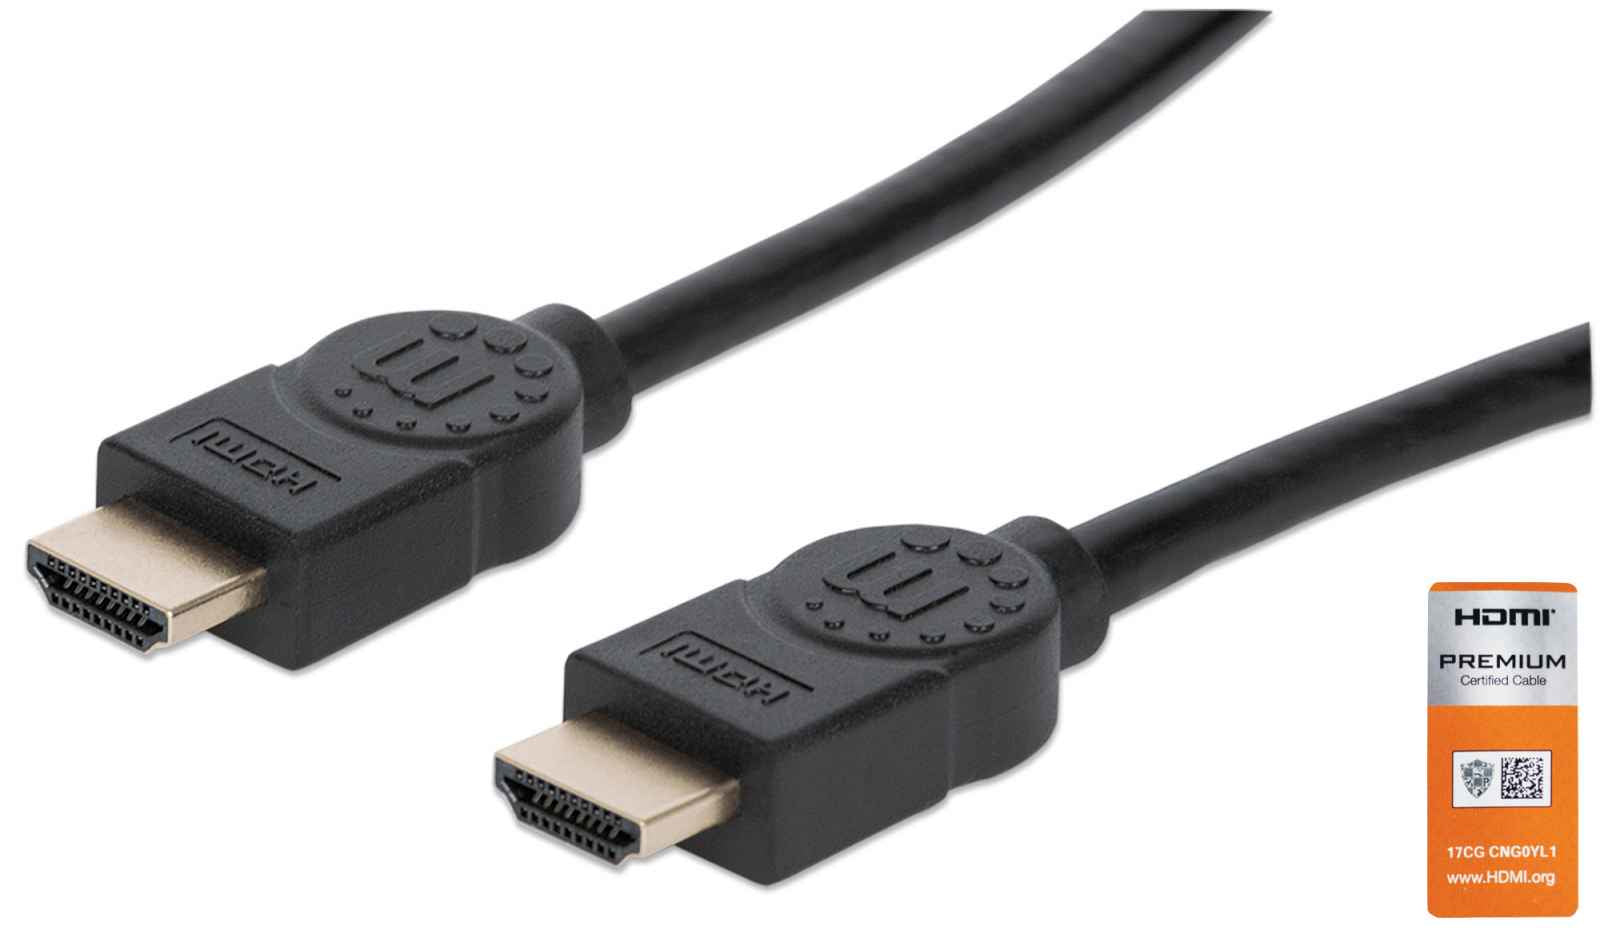 Manhattan HDMI Cable with Ethernet, 4K@60Hz (Premium High Speed), 1m, Male to Male, Black, Equivalent to HDMM1MP, Ultra HD 4k x 2k, Fully Shielded, Gold Plated Contacts, Lifetime Warranty, Polybag